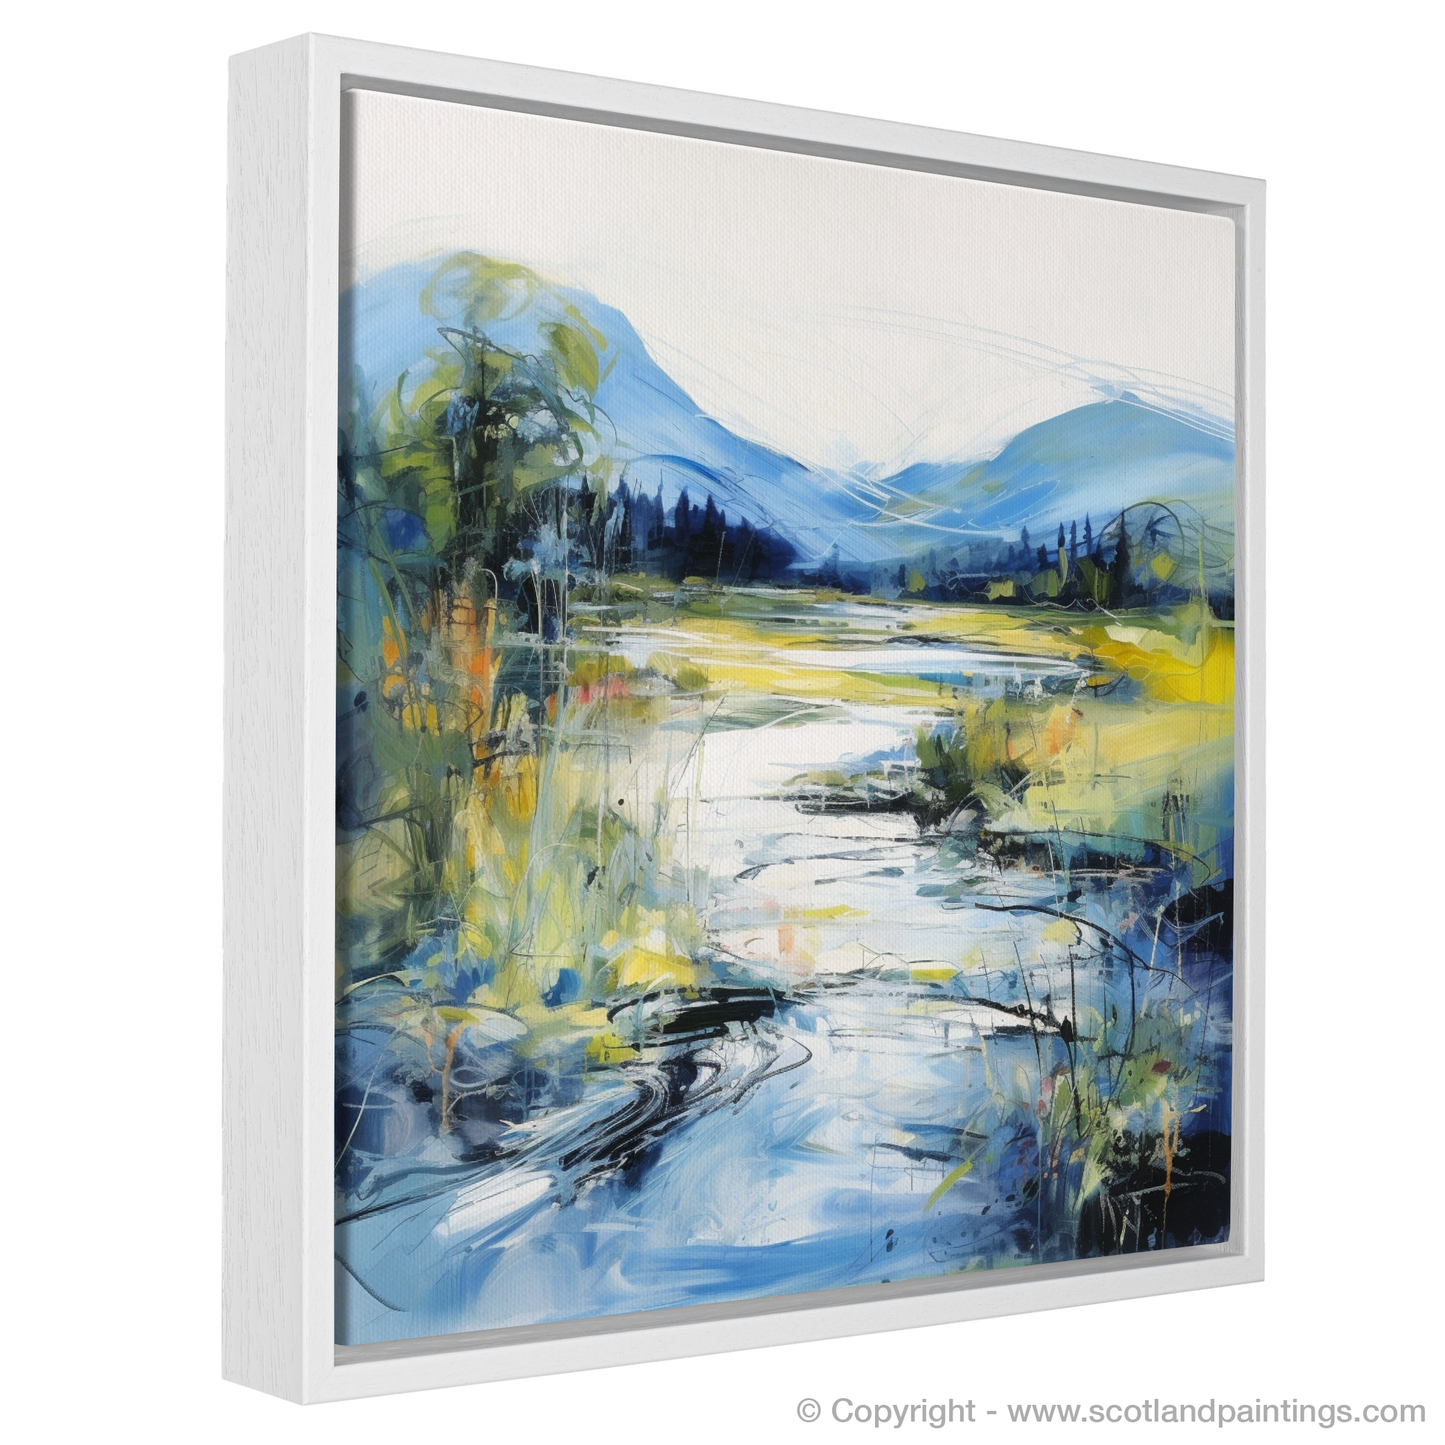 Painting and Art Print of River Orchy, Argyll and Bute in summer entitled "Summer Serenade by River Orchy".